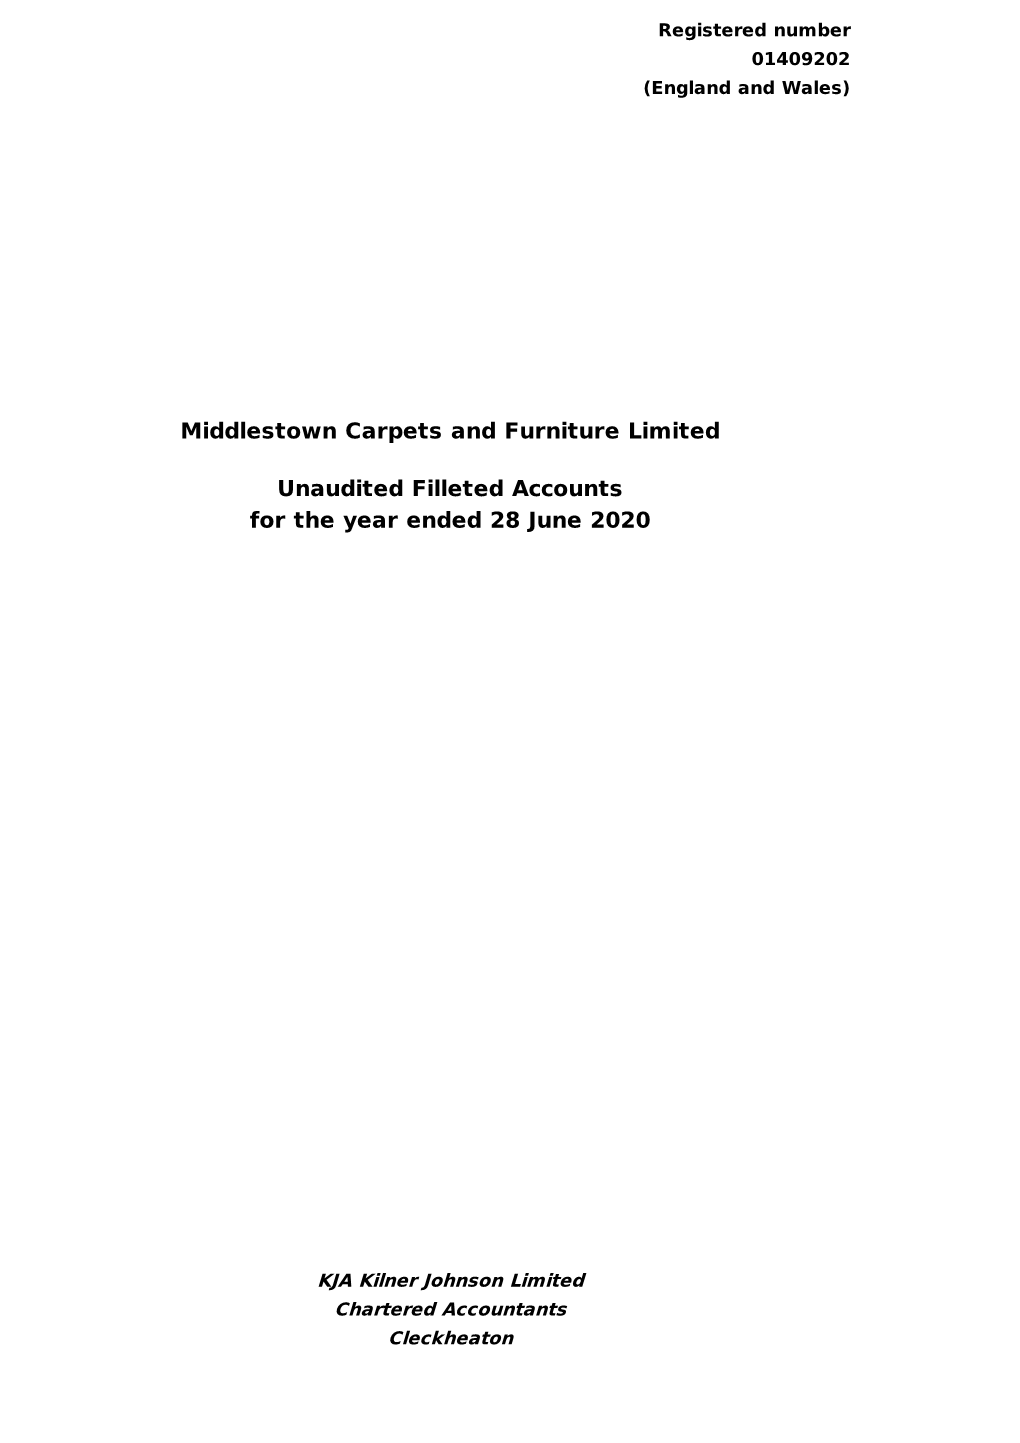 Middlestown Carpets and Furniture Limited Unaudited Filleted